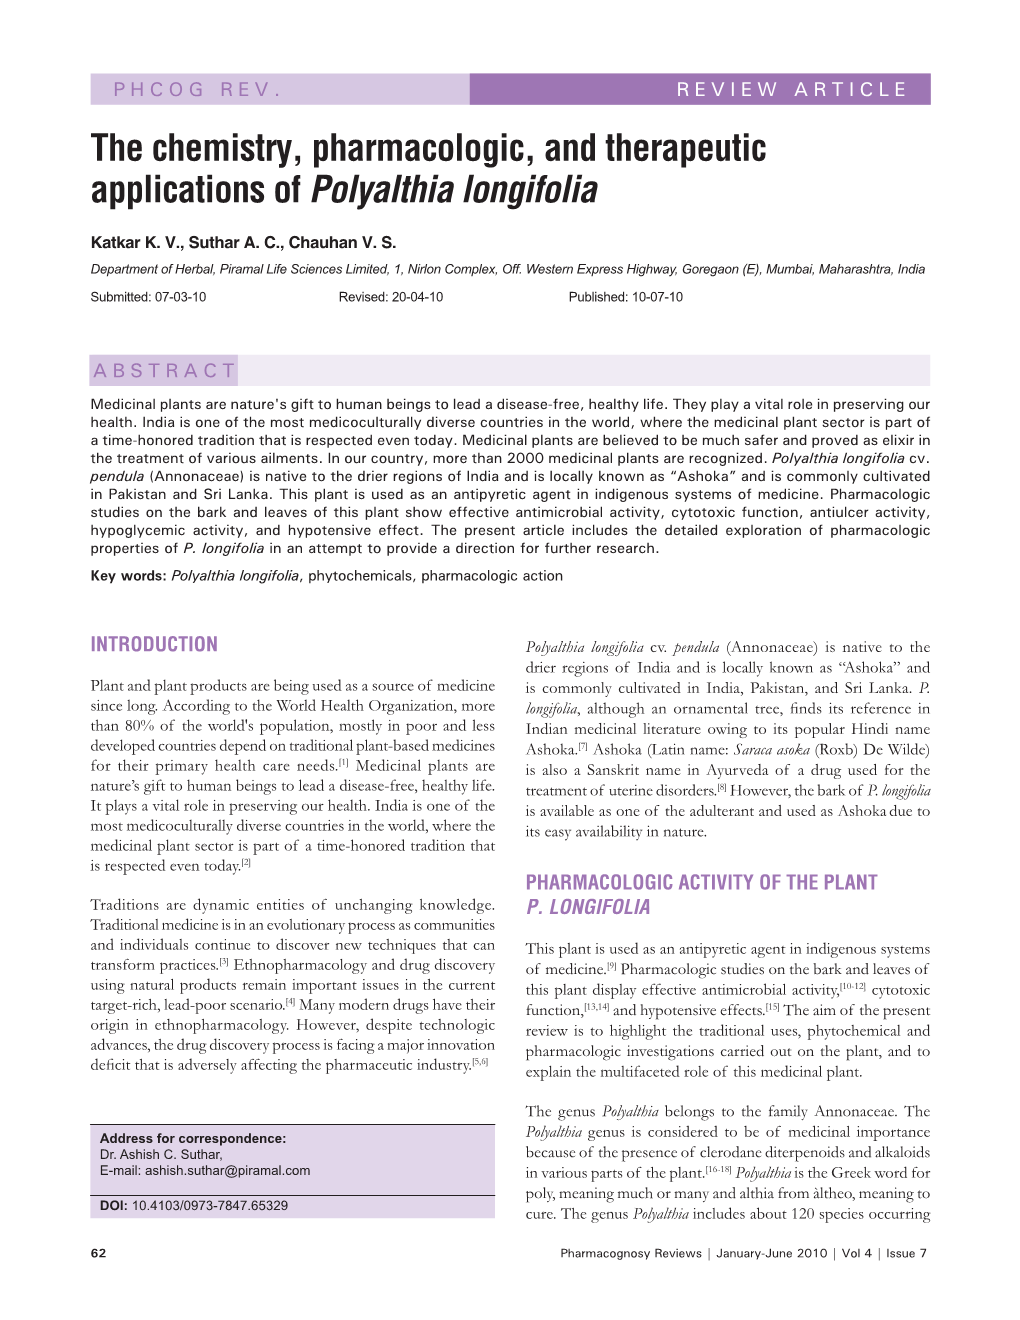 The Chemistry, Pharmacologic, and Therapeutic Applications of Polyalthia Longifolia